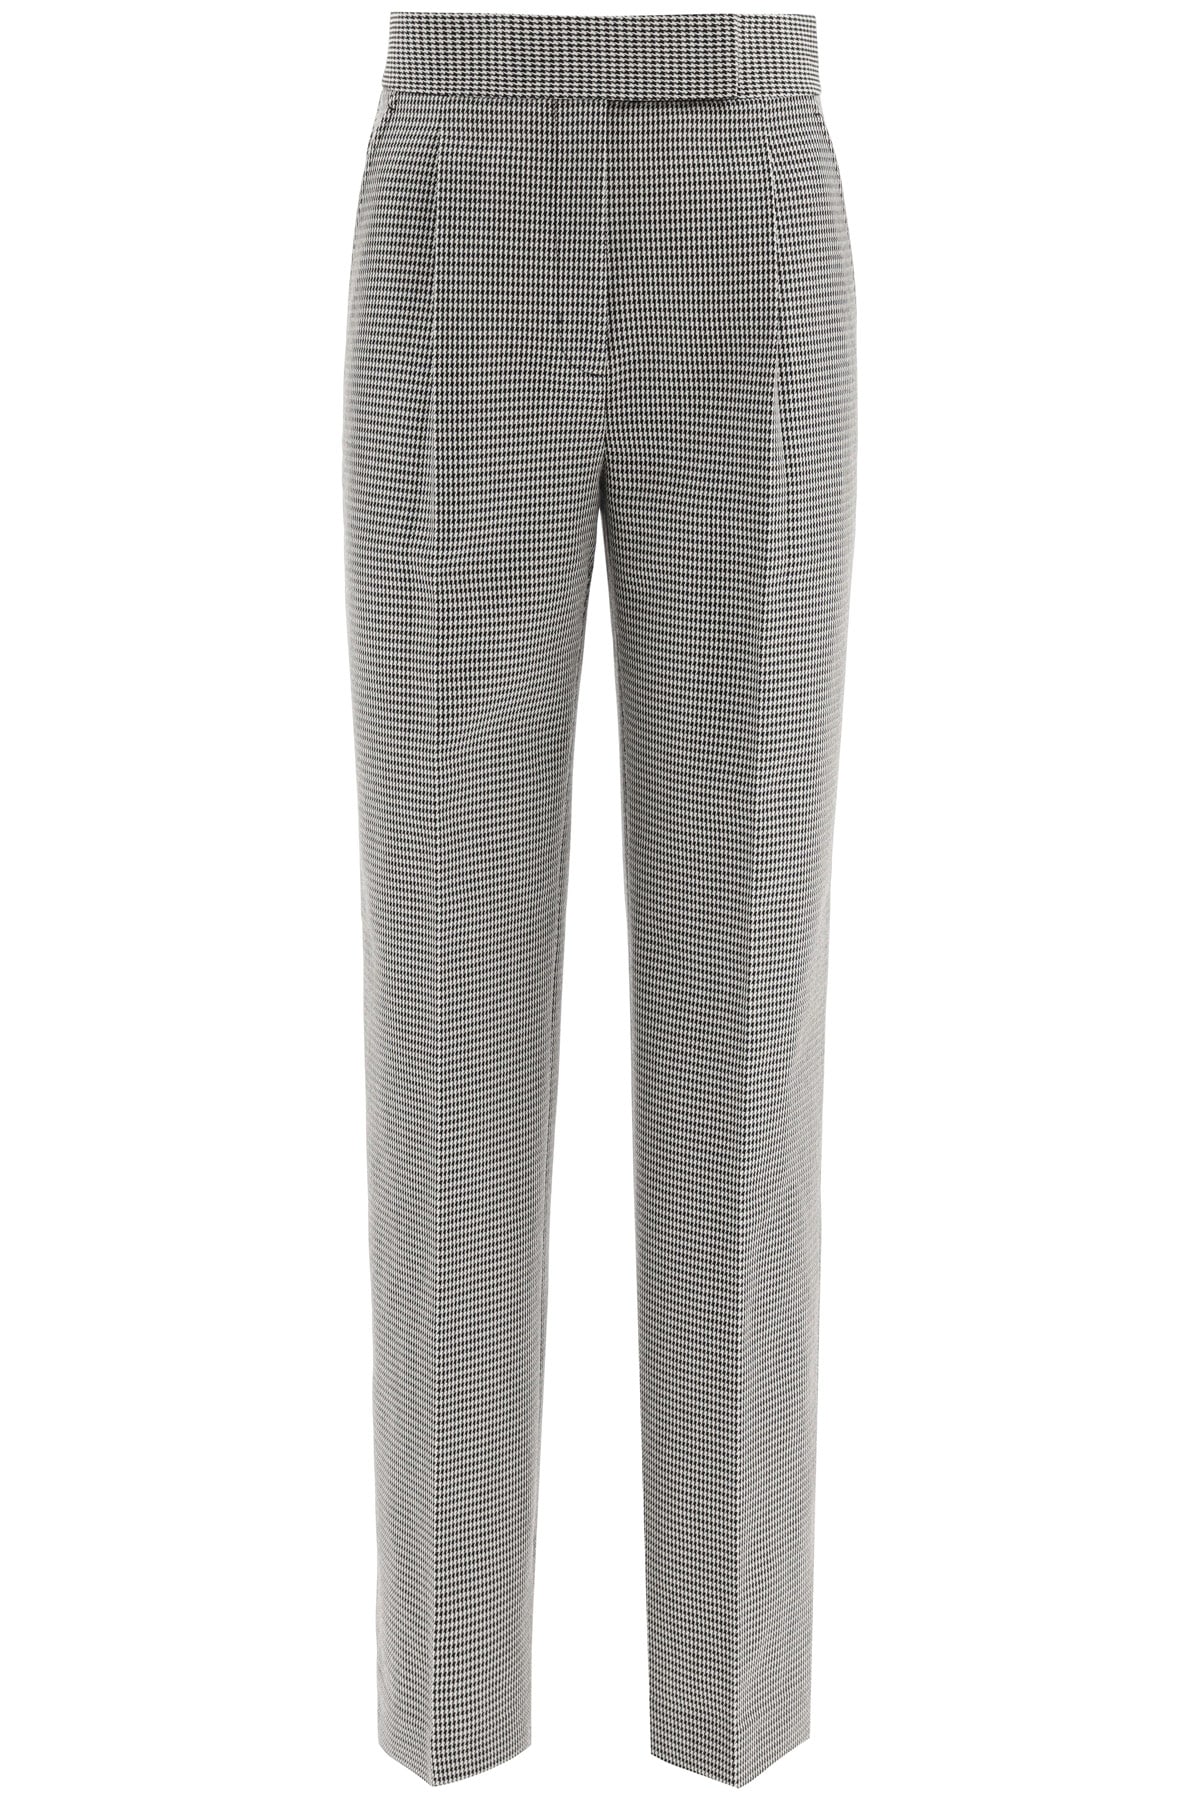 Alexander Wang Houndstooth Trousers